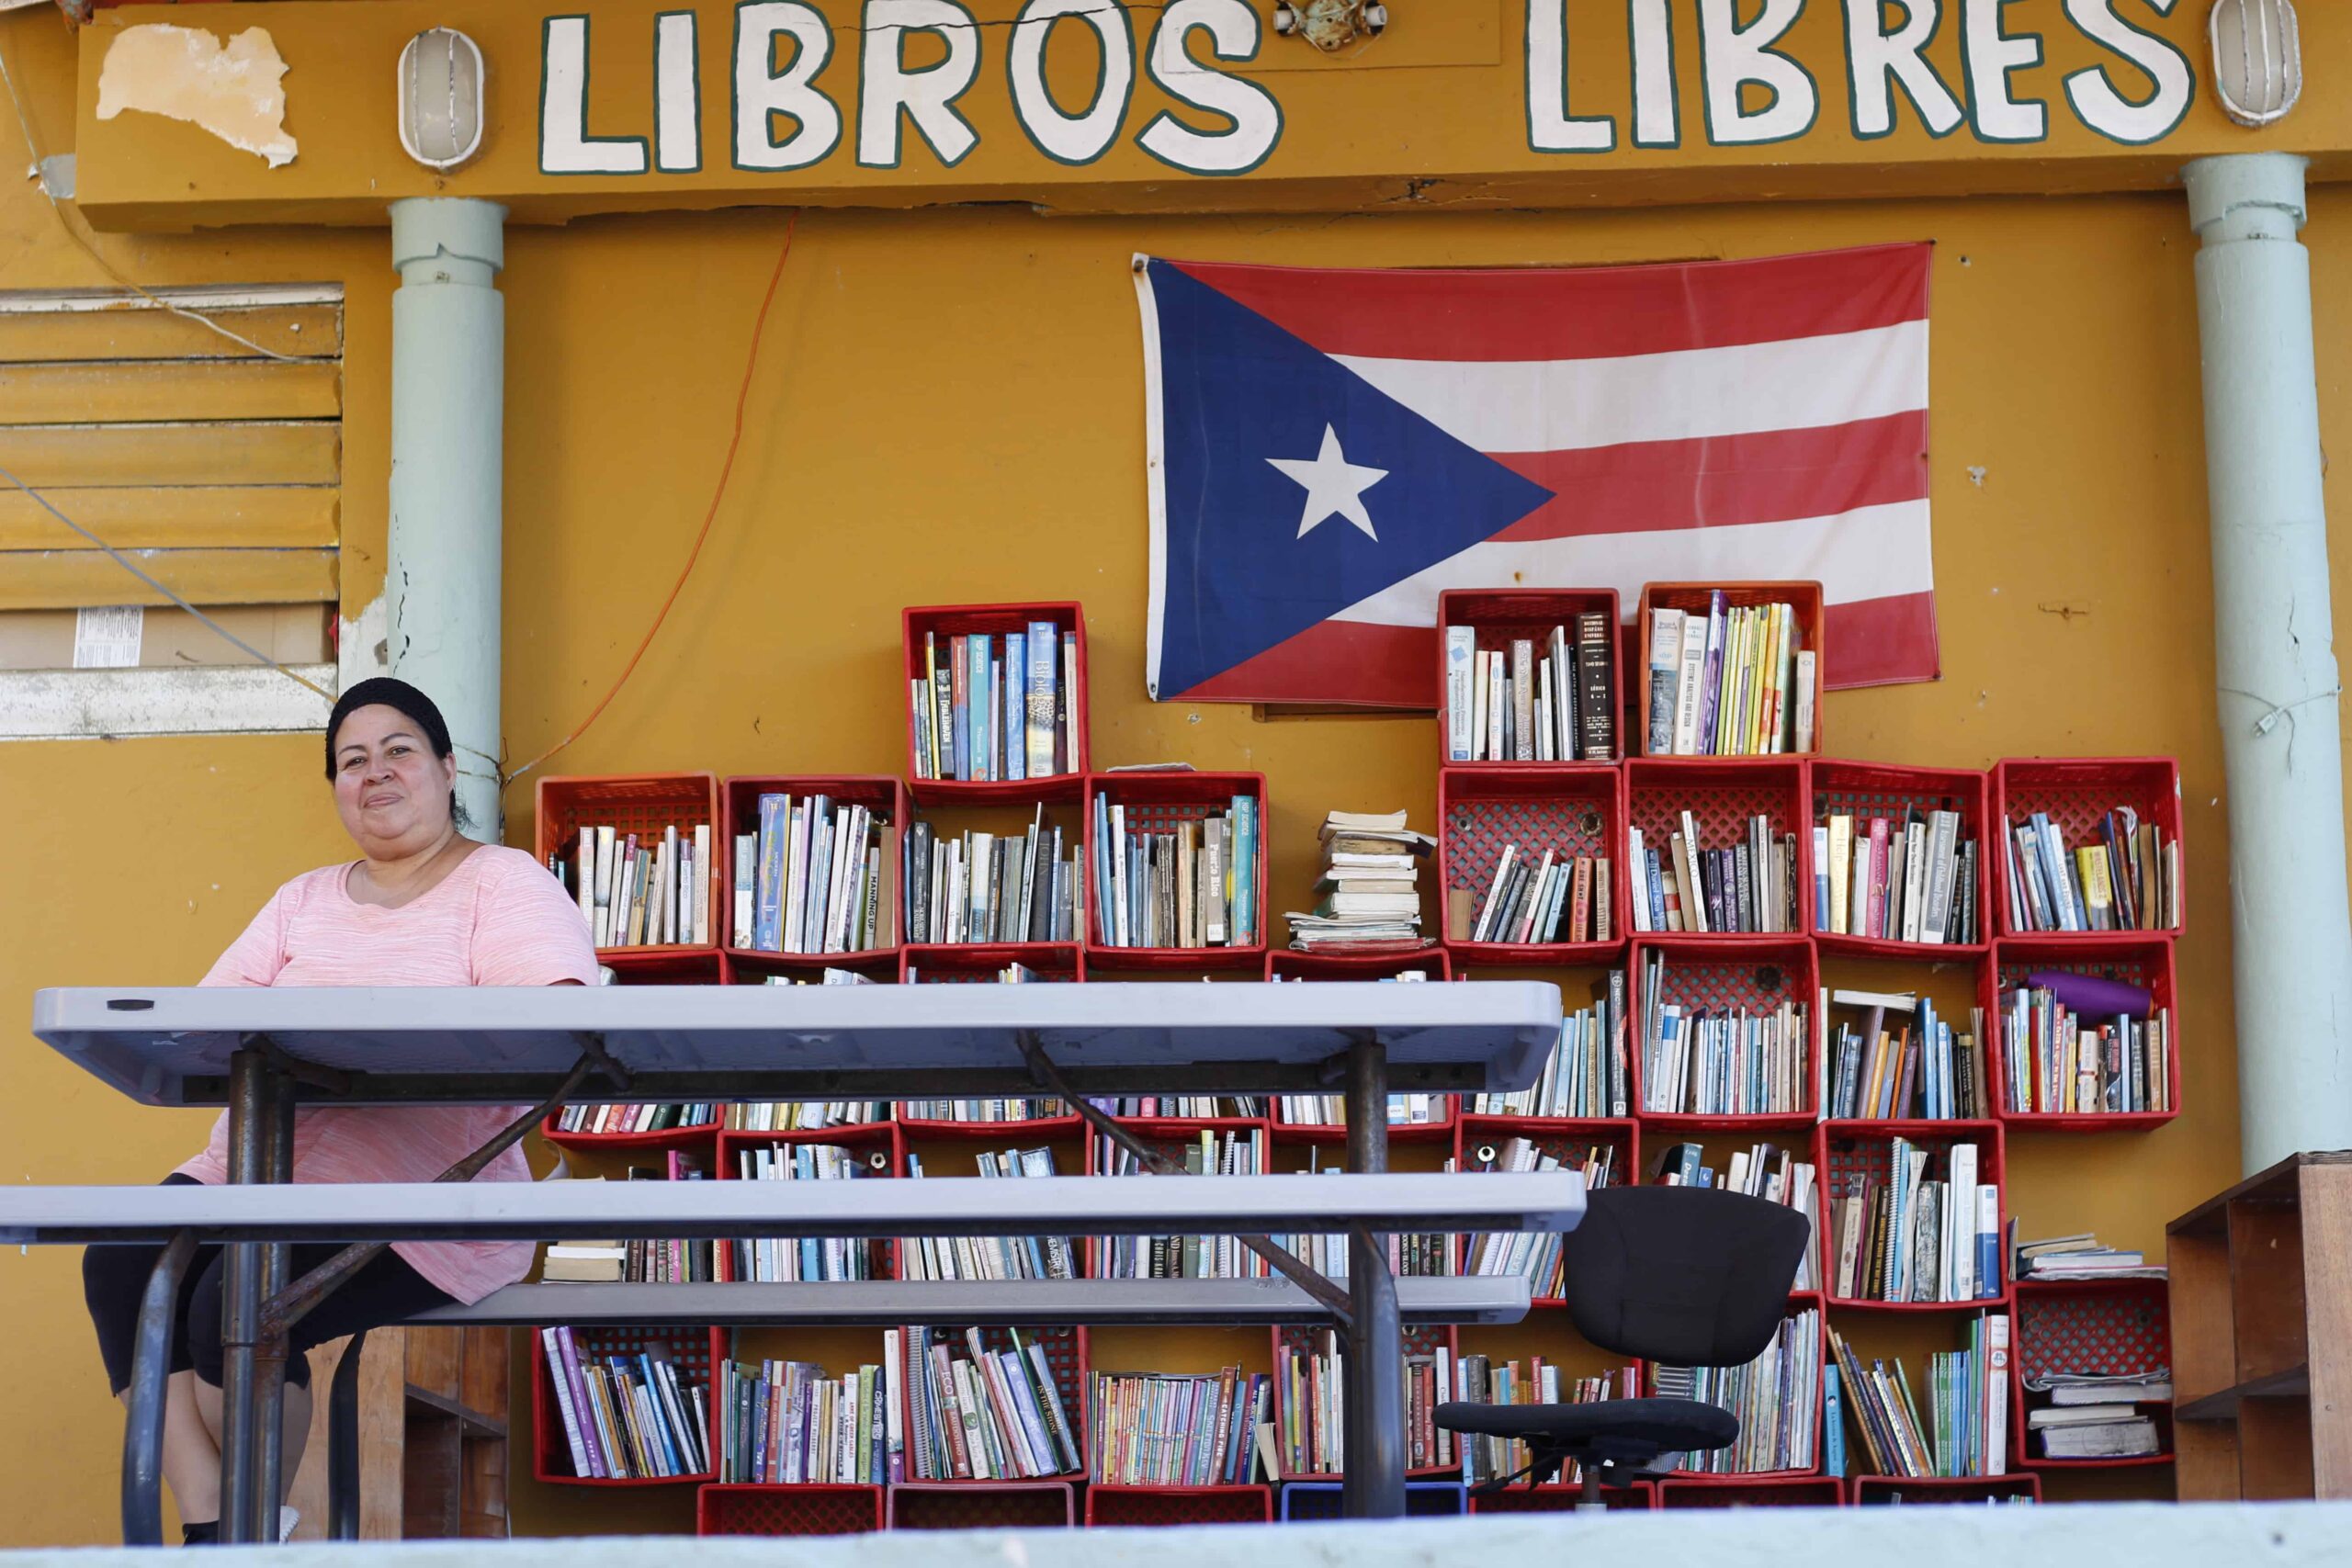 A woman sits at a picnic table in front of bookshelves filled with books and a Puerto Rican flag.